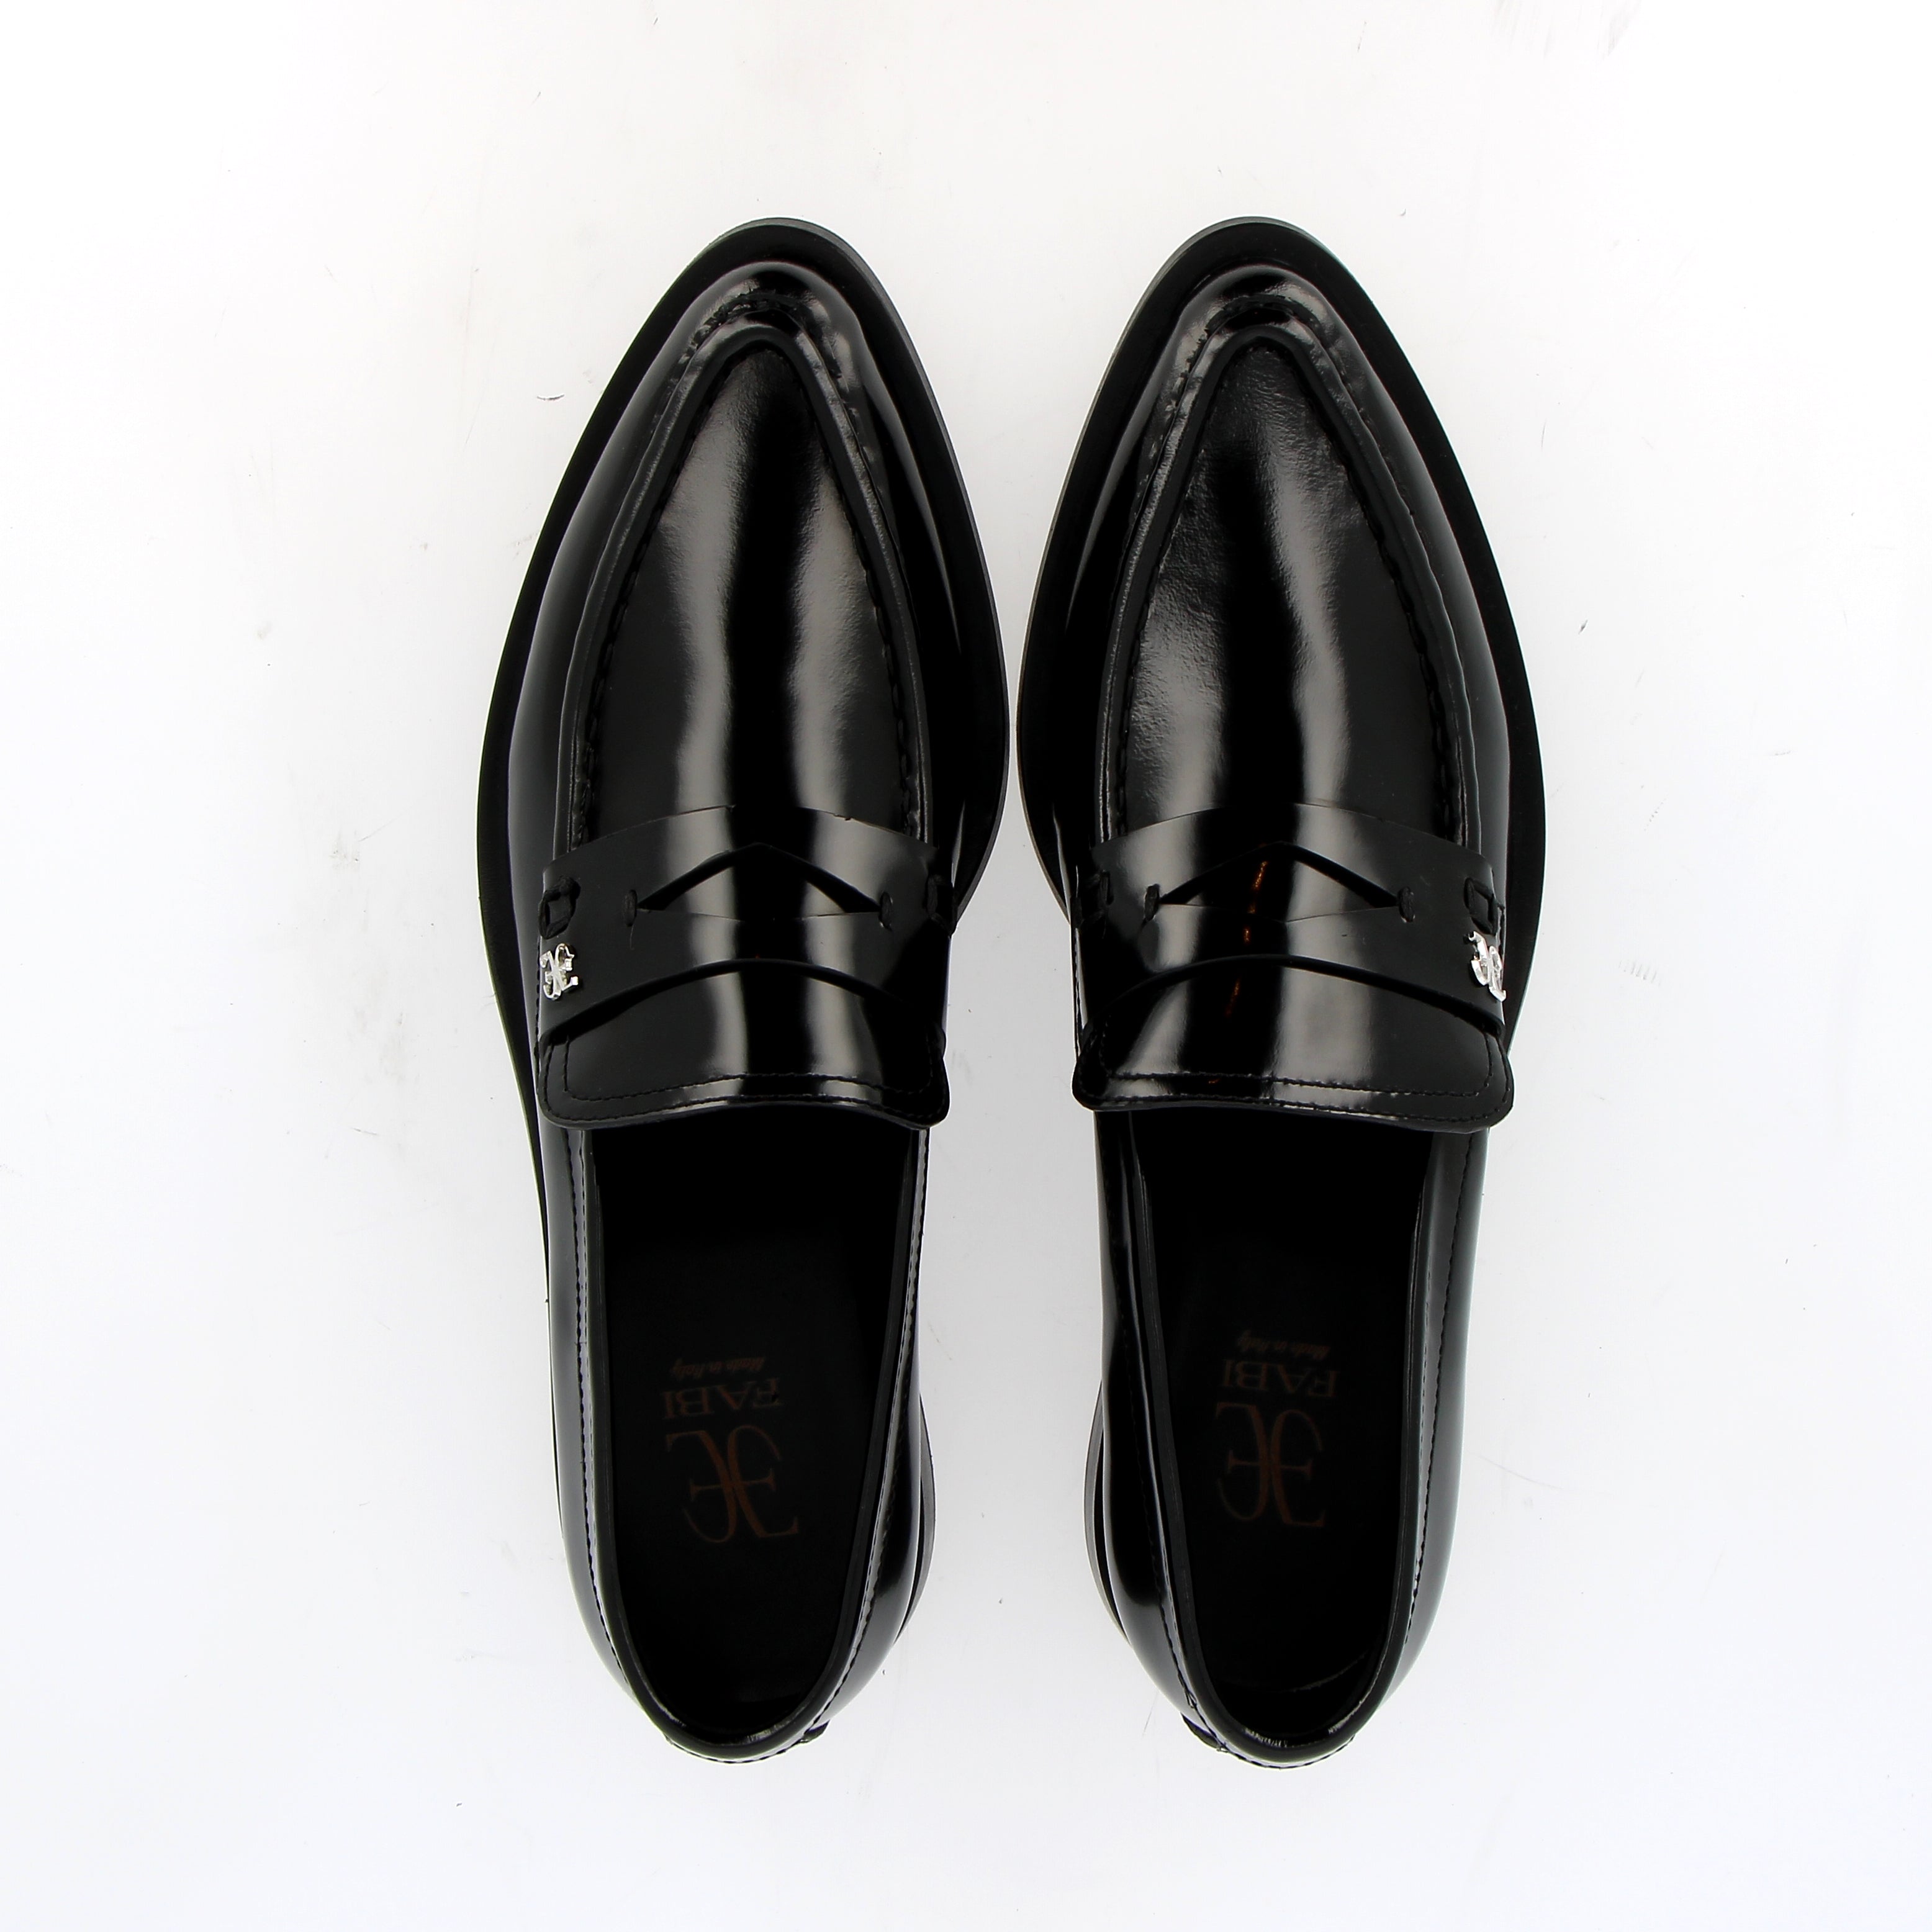 Black leather pointed loafer